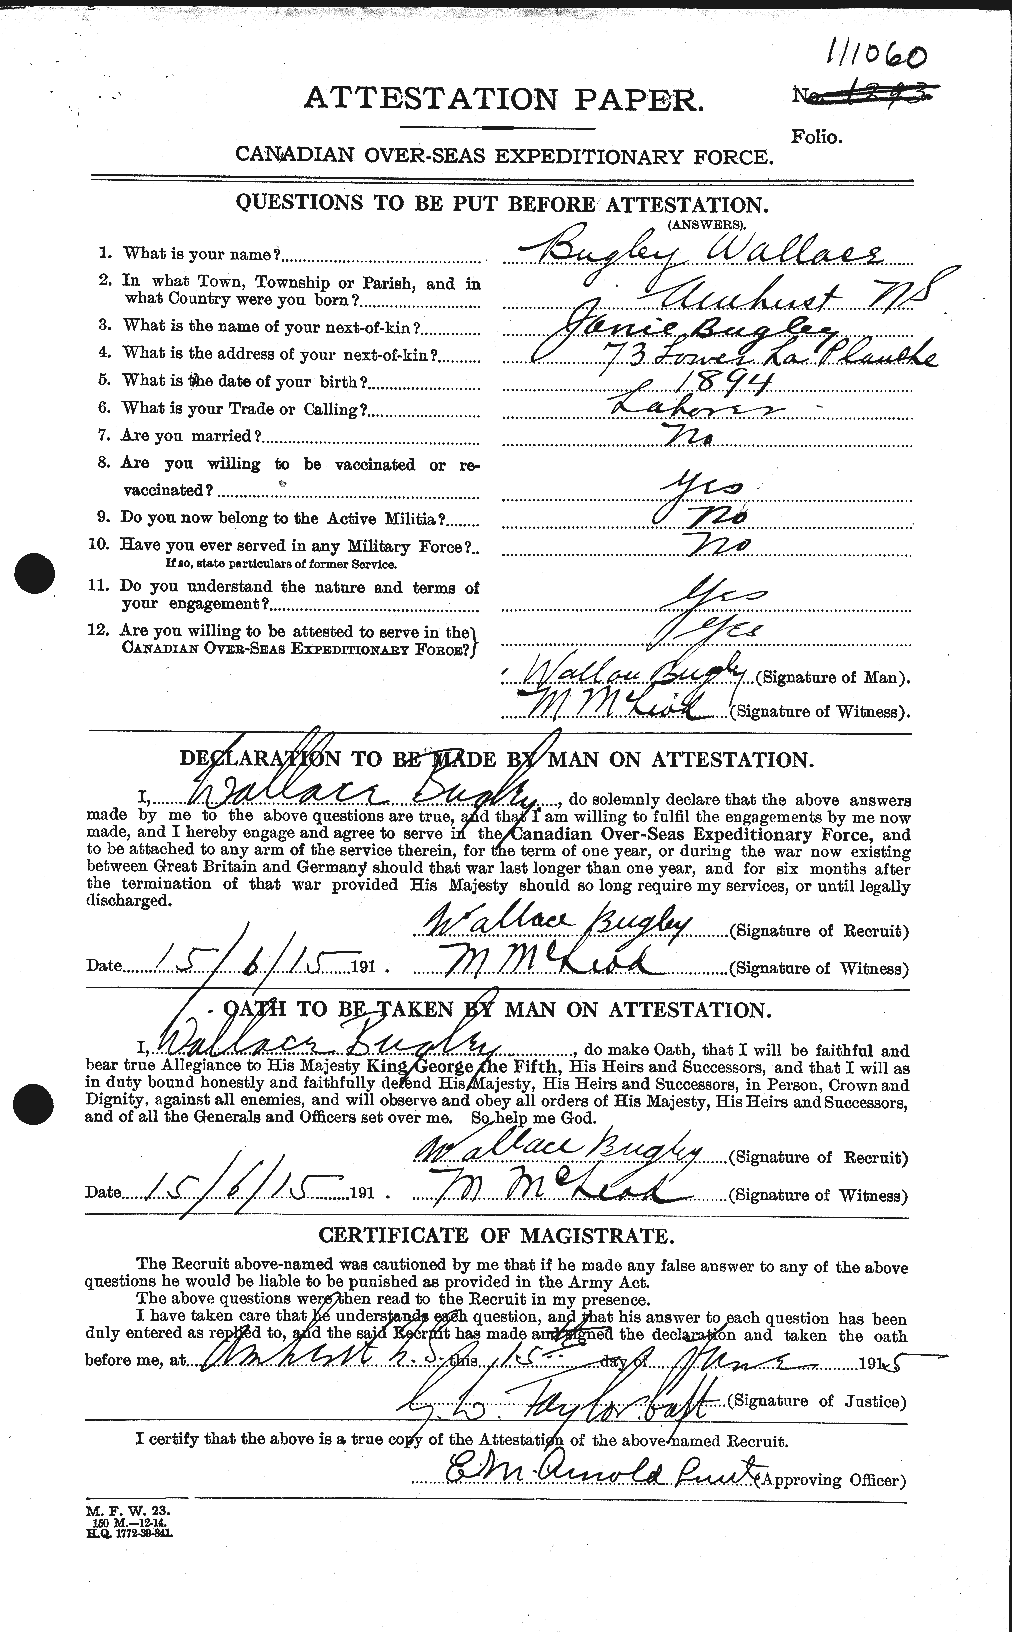 Personnel Records of the First World War - CEF 270532a